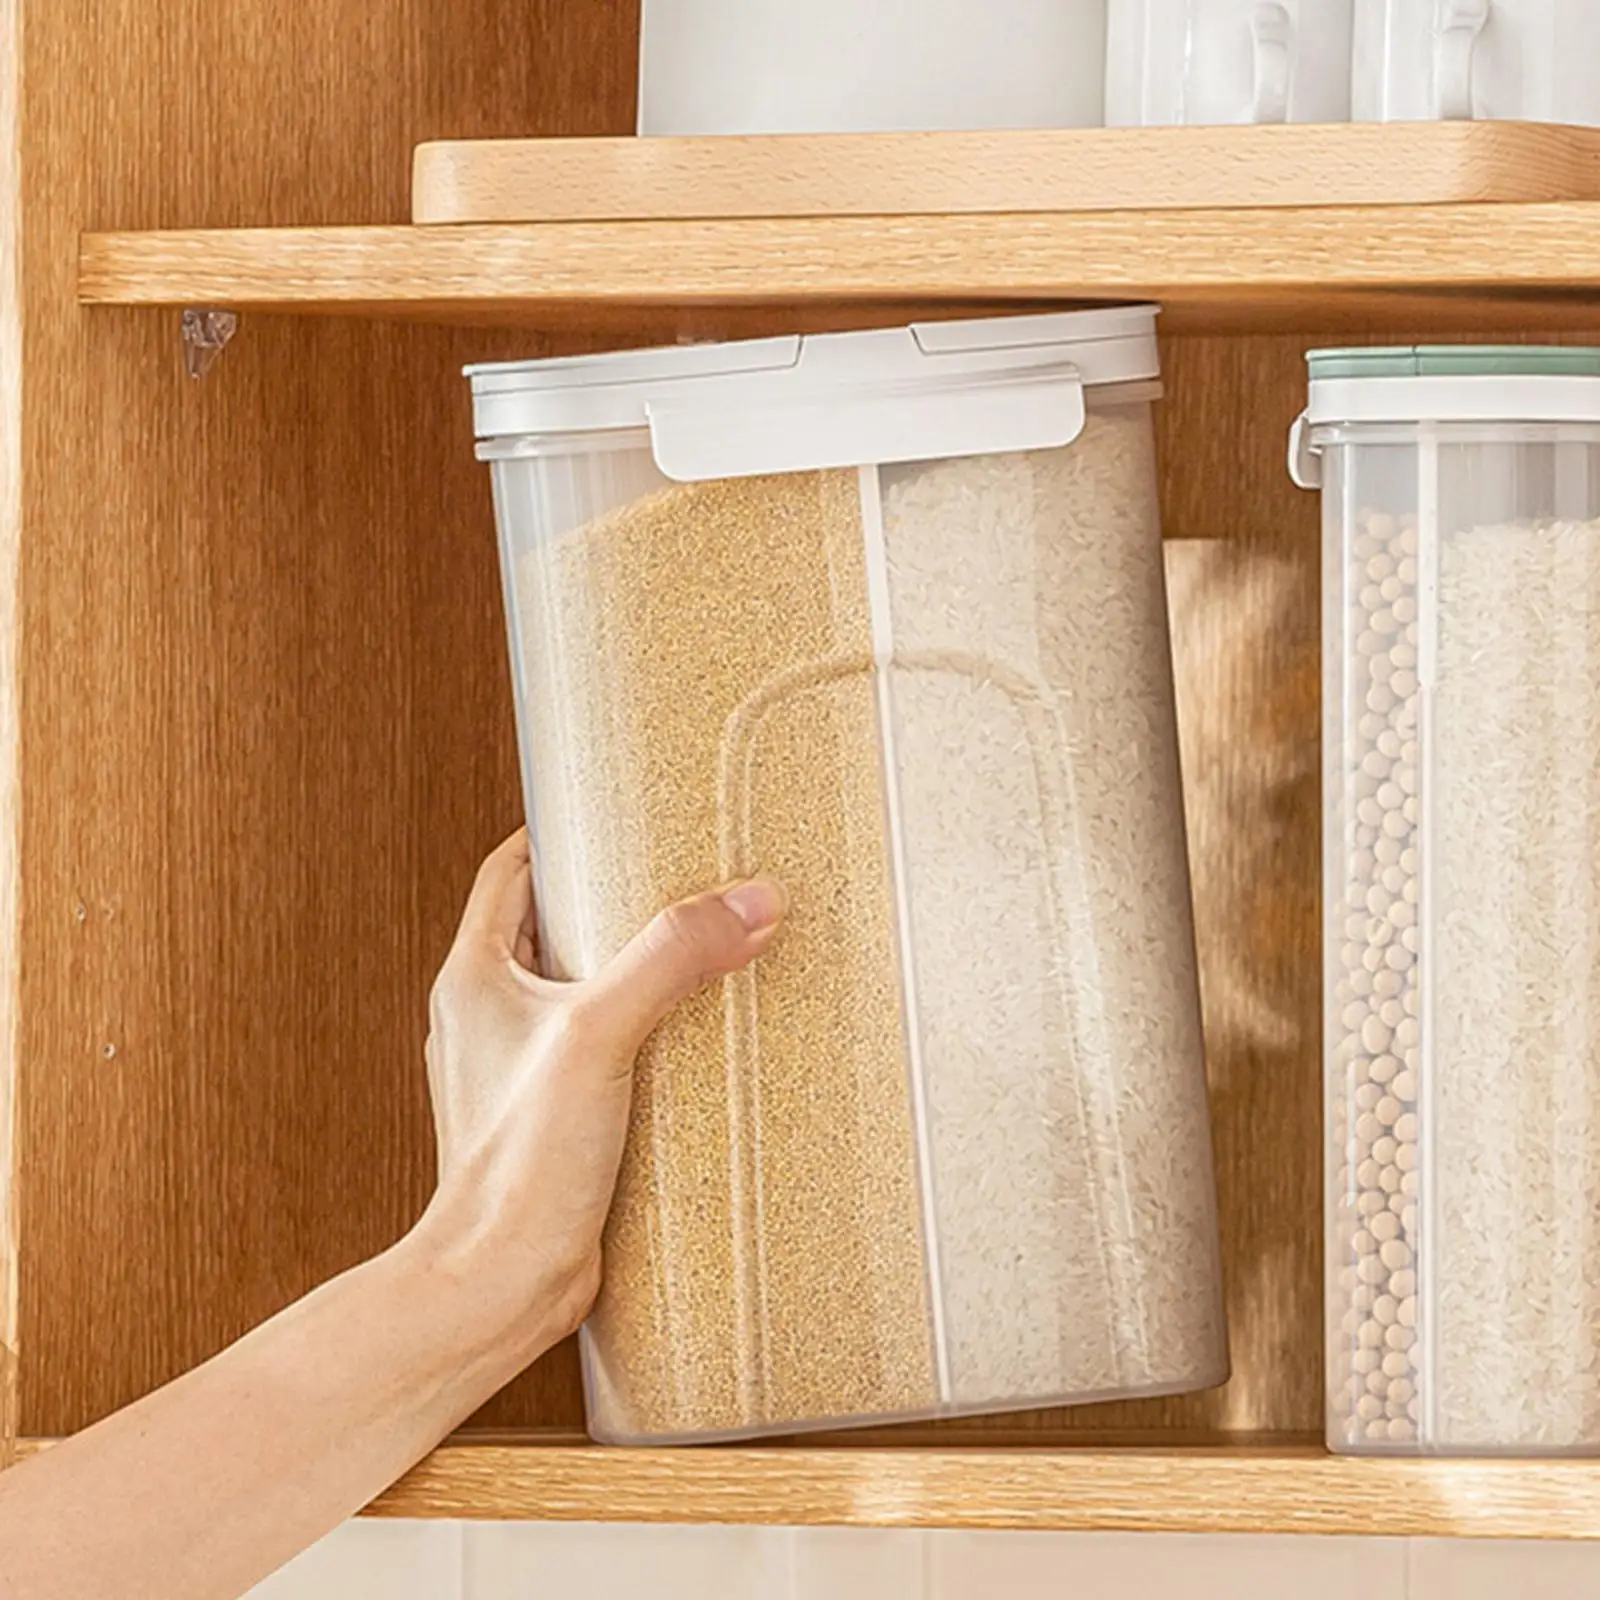   Food Jar Organizer,  Coffee Bean Oatmeal Oat Flour Cereal Cans with Sealed Lid & 4-Grid Divider